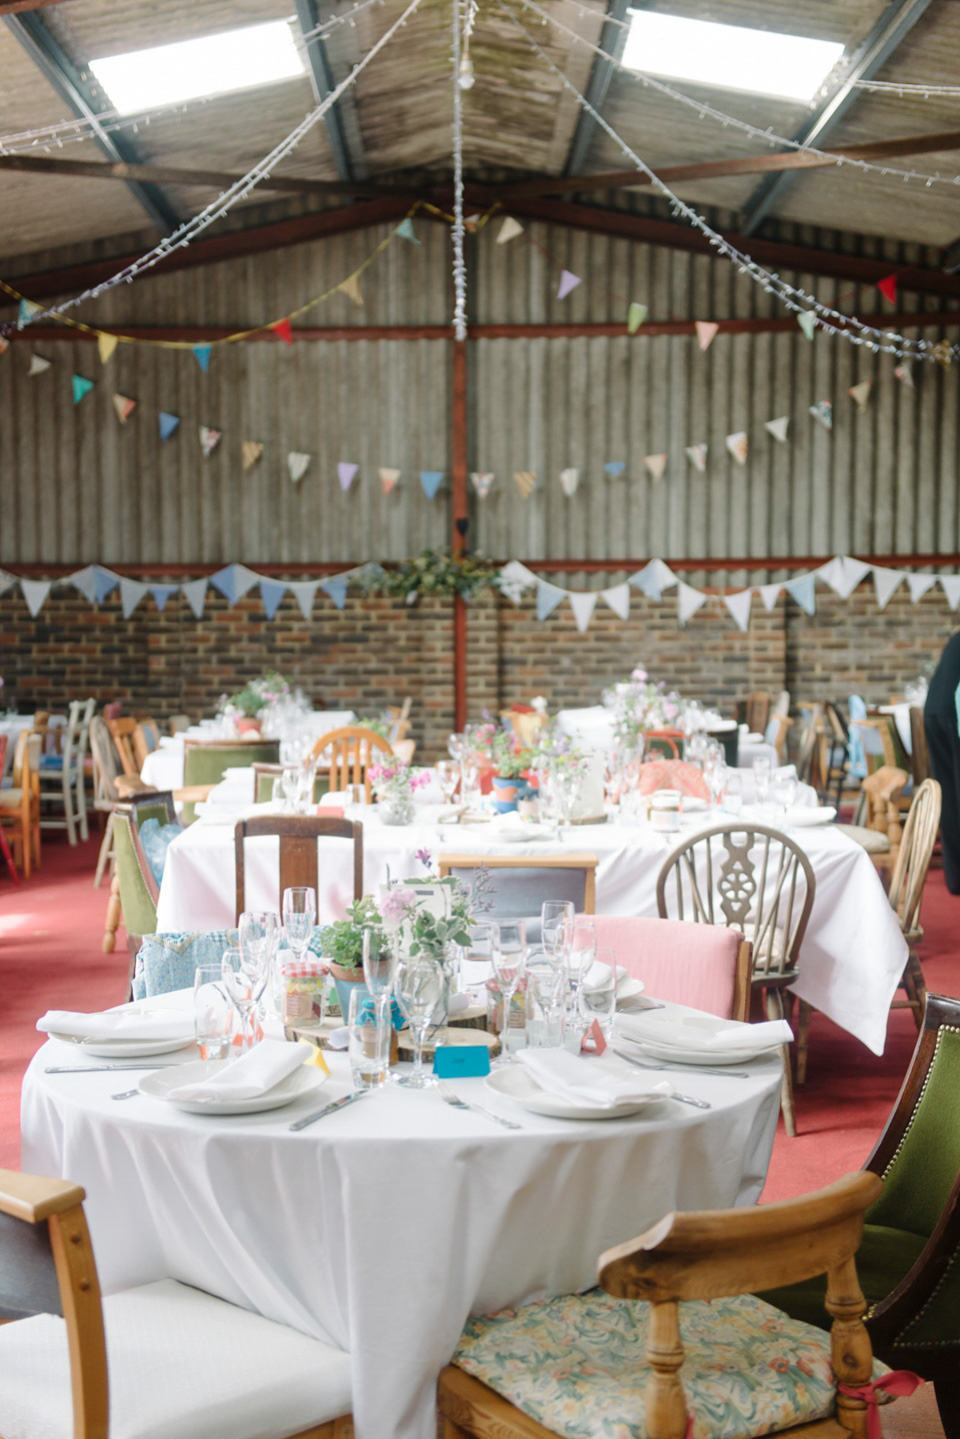 Colourful homespun barn wedding. Photography by Eliza Claire.